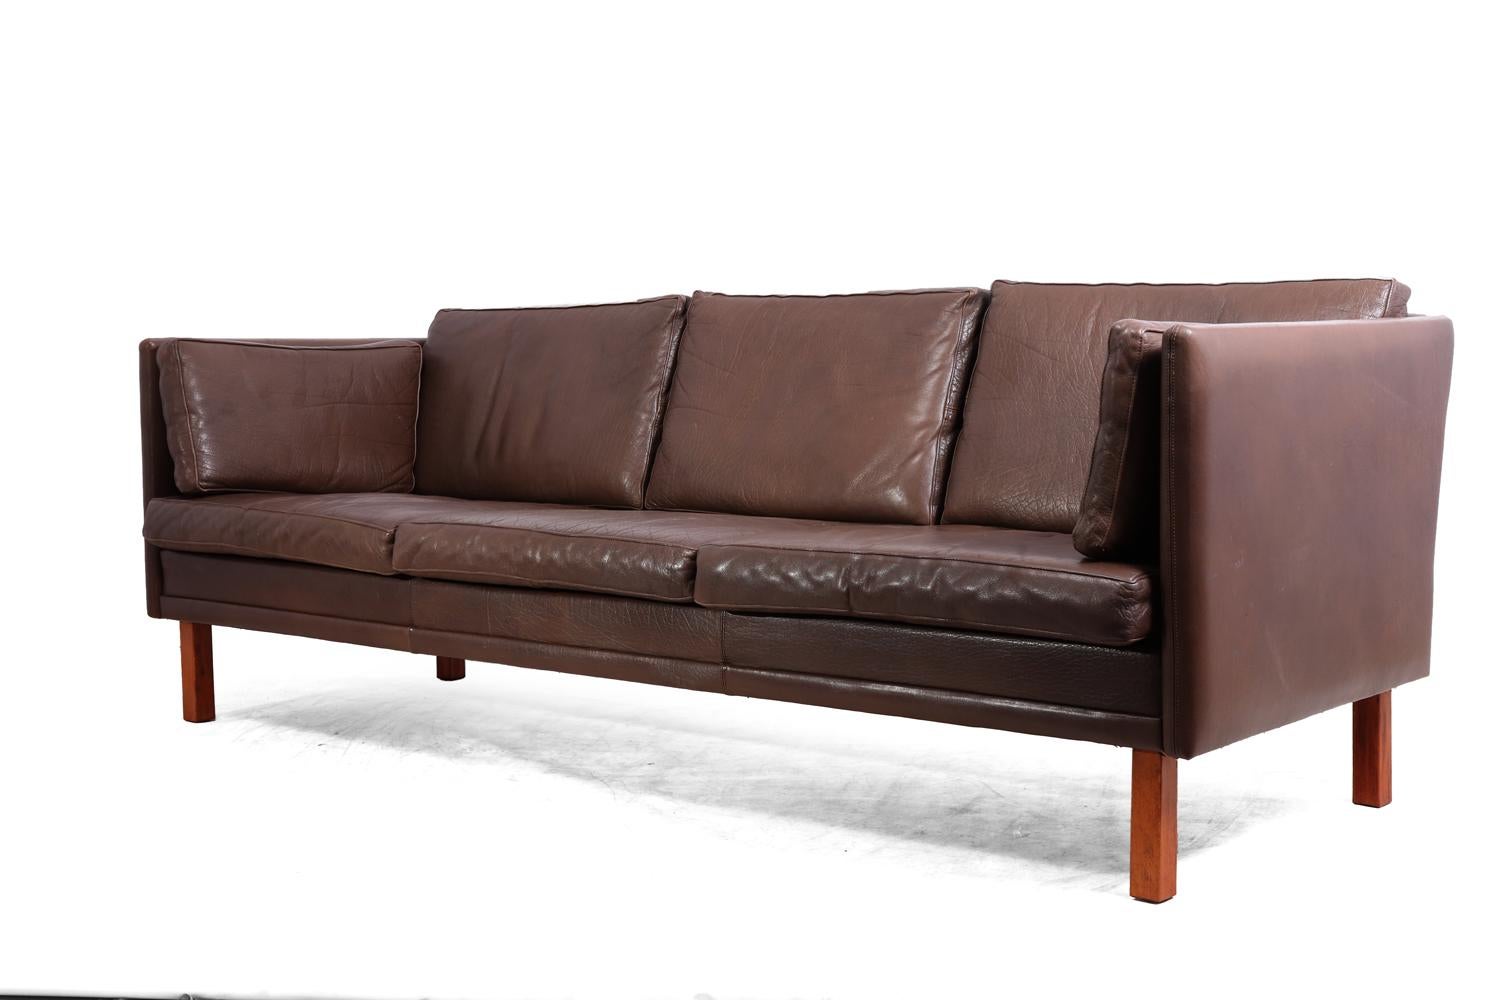 Mid-Century Modern Danish Sofa
A thick brown leather three-seat Danish sofa, very good condition with no rips tears or repairs

Age: 1960

Style: Mid-Century Modern

Material: Leather

Origin: Denmark

Condition: Very good, minimal wear